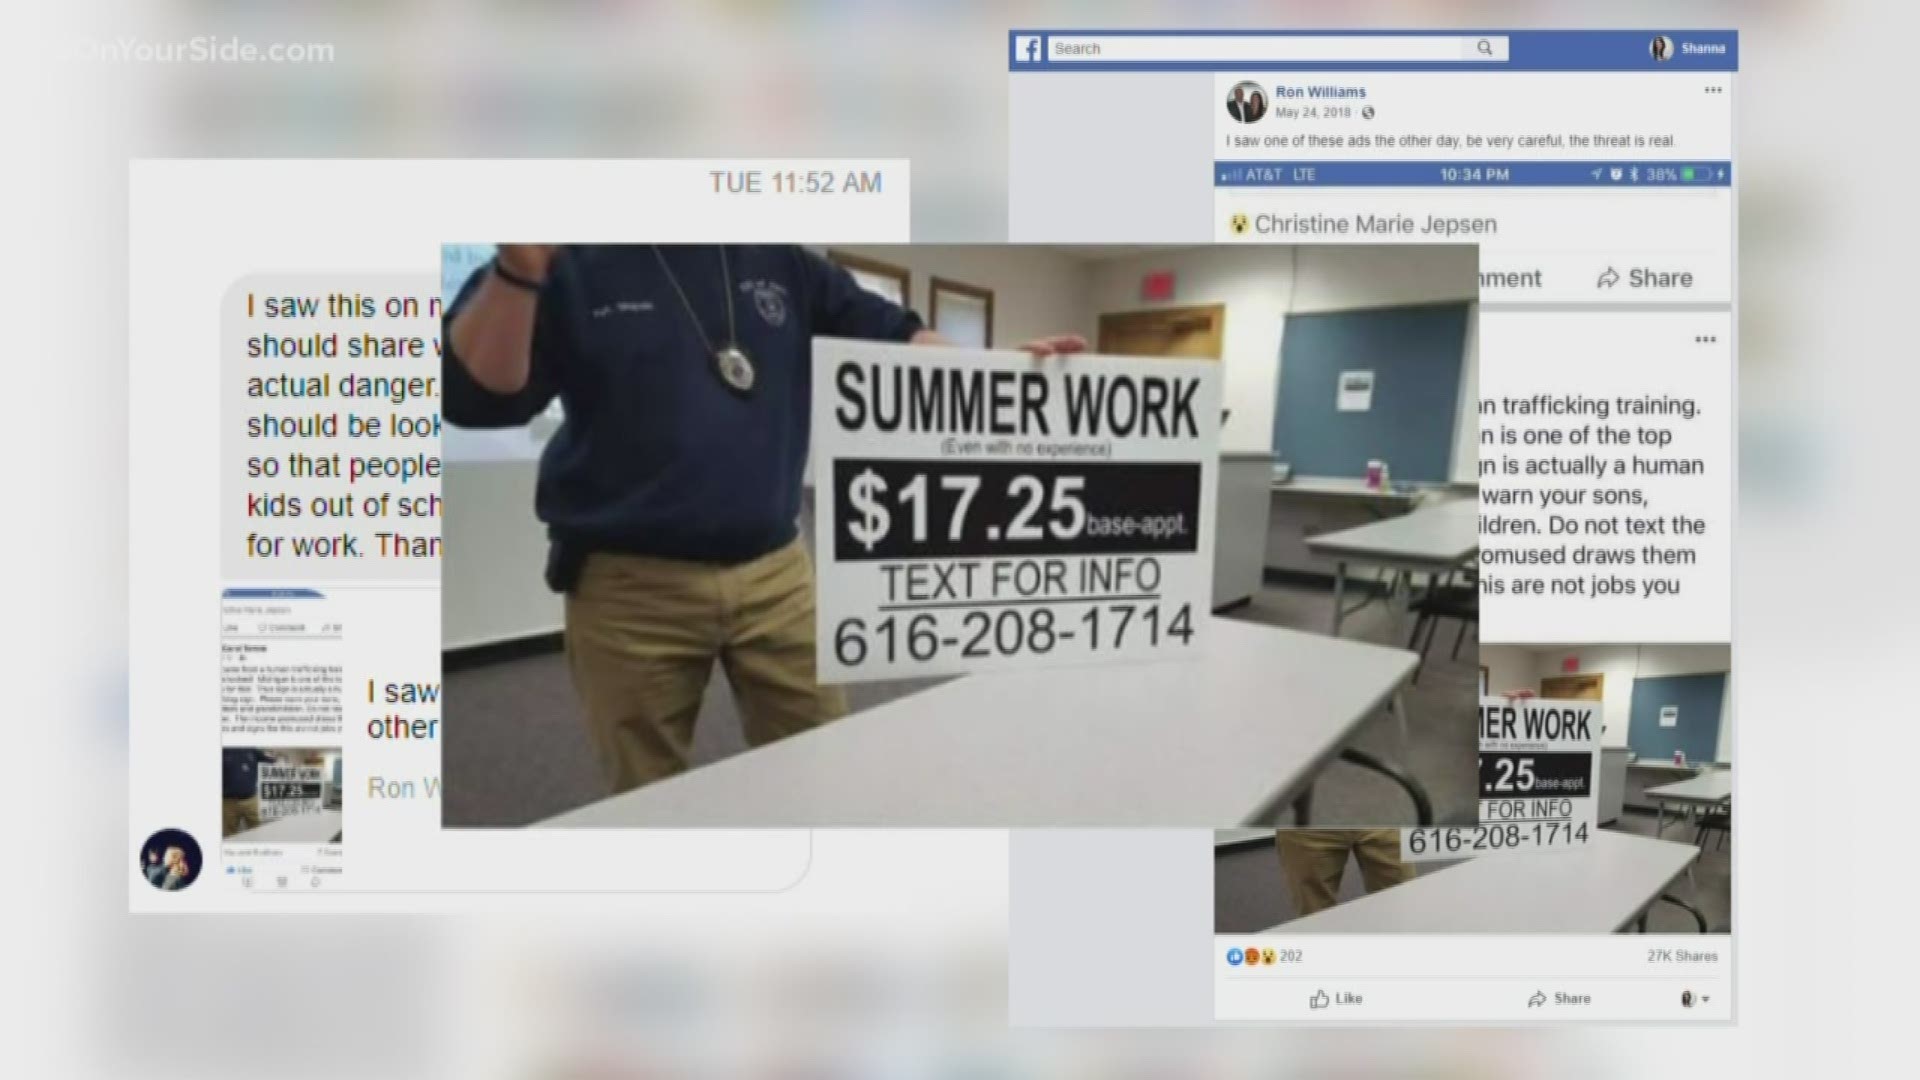 A concerned viewer is questioning whether a Facebook post claiming human trafficking rings are known to use summer job signs to lure victims is true.